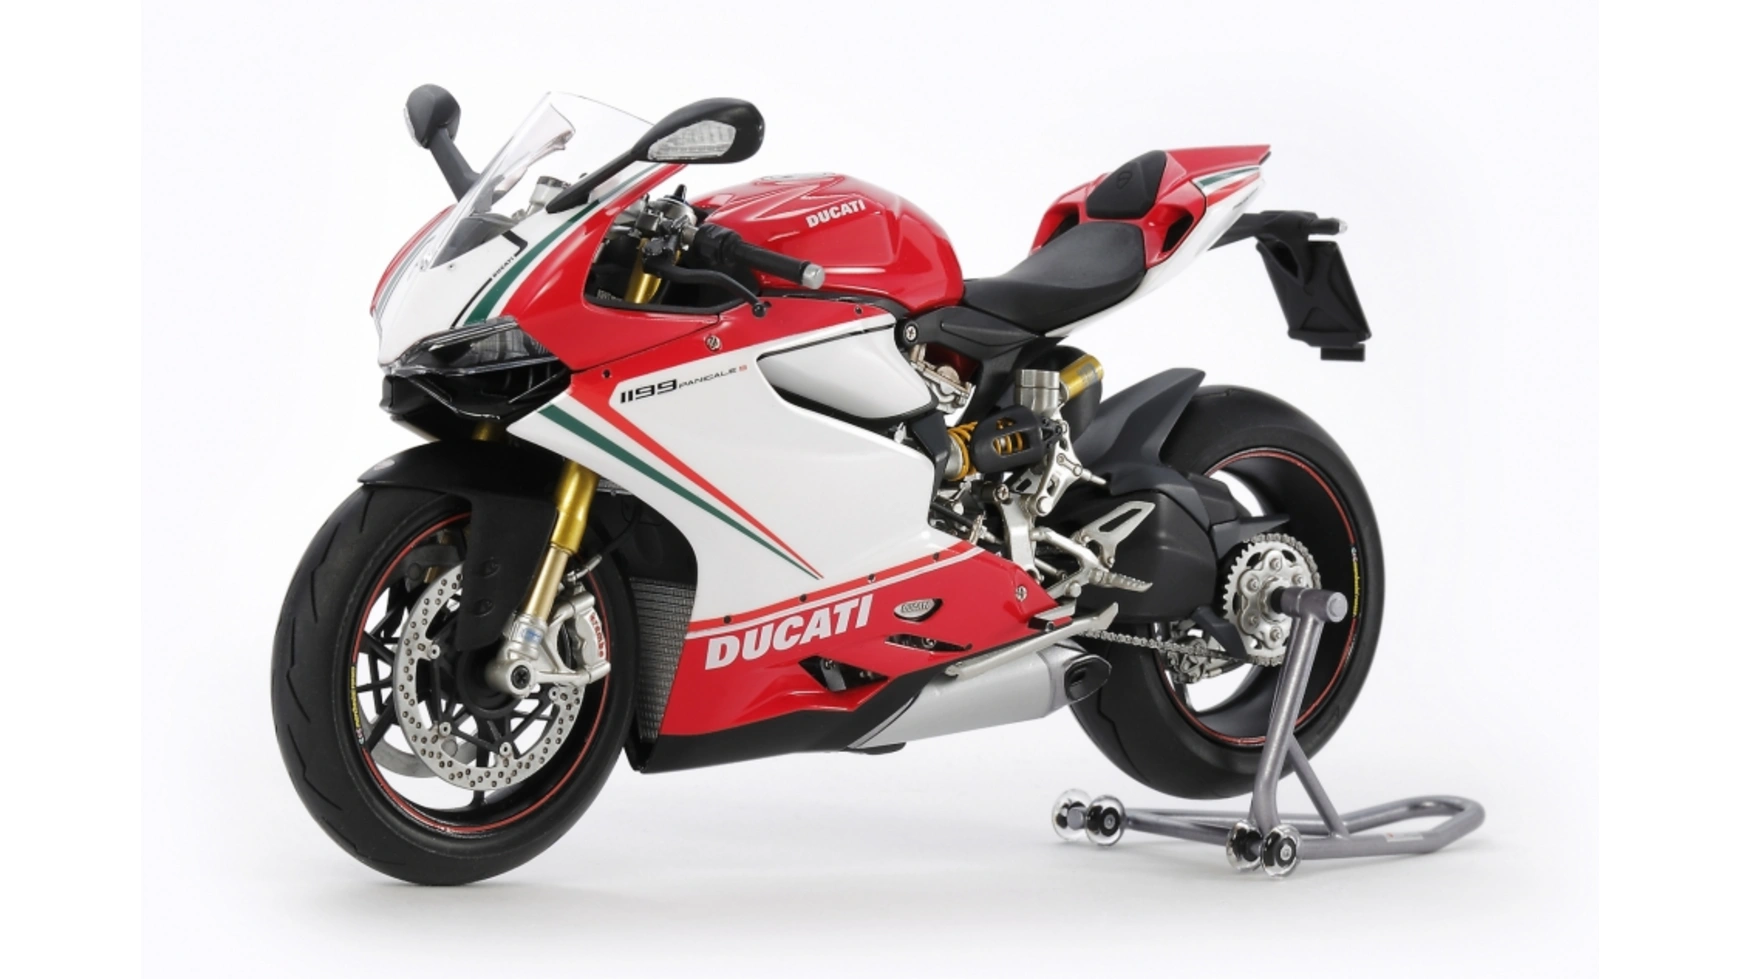 Tamiya 1:12 Ducati 1199 Panigale S Tricolore for ducati 1199 panigale s tricolor cnc motorcycle accessories adjustable brake clutch levers foldable extending with logo